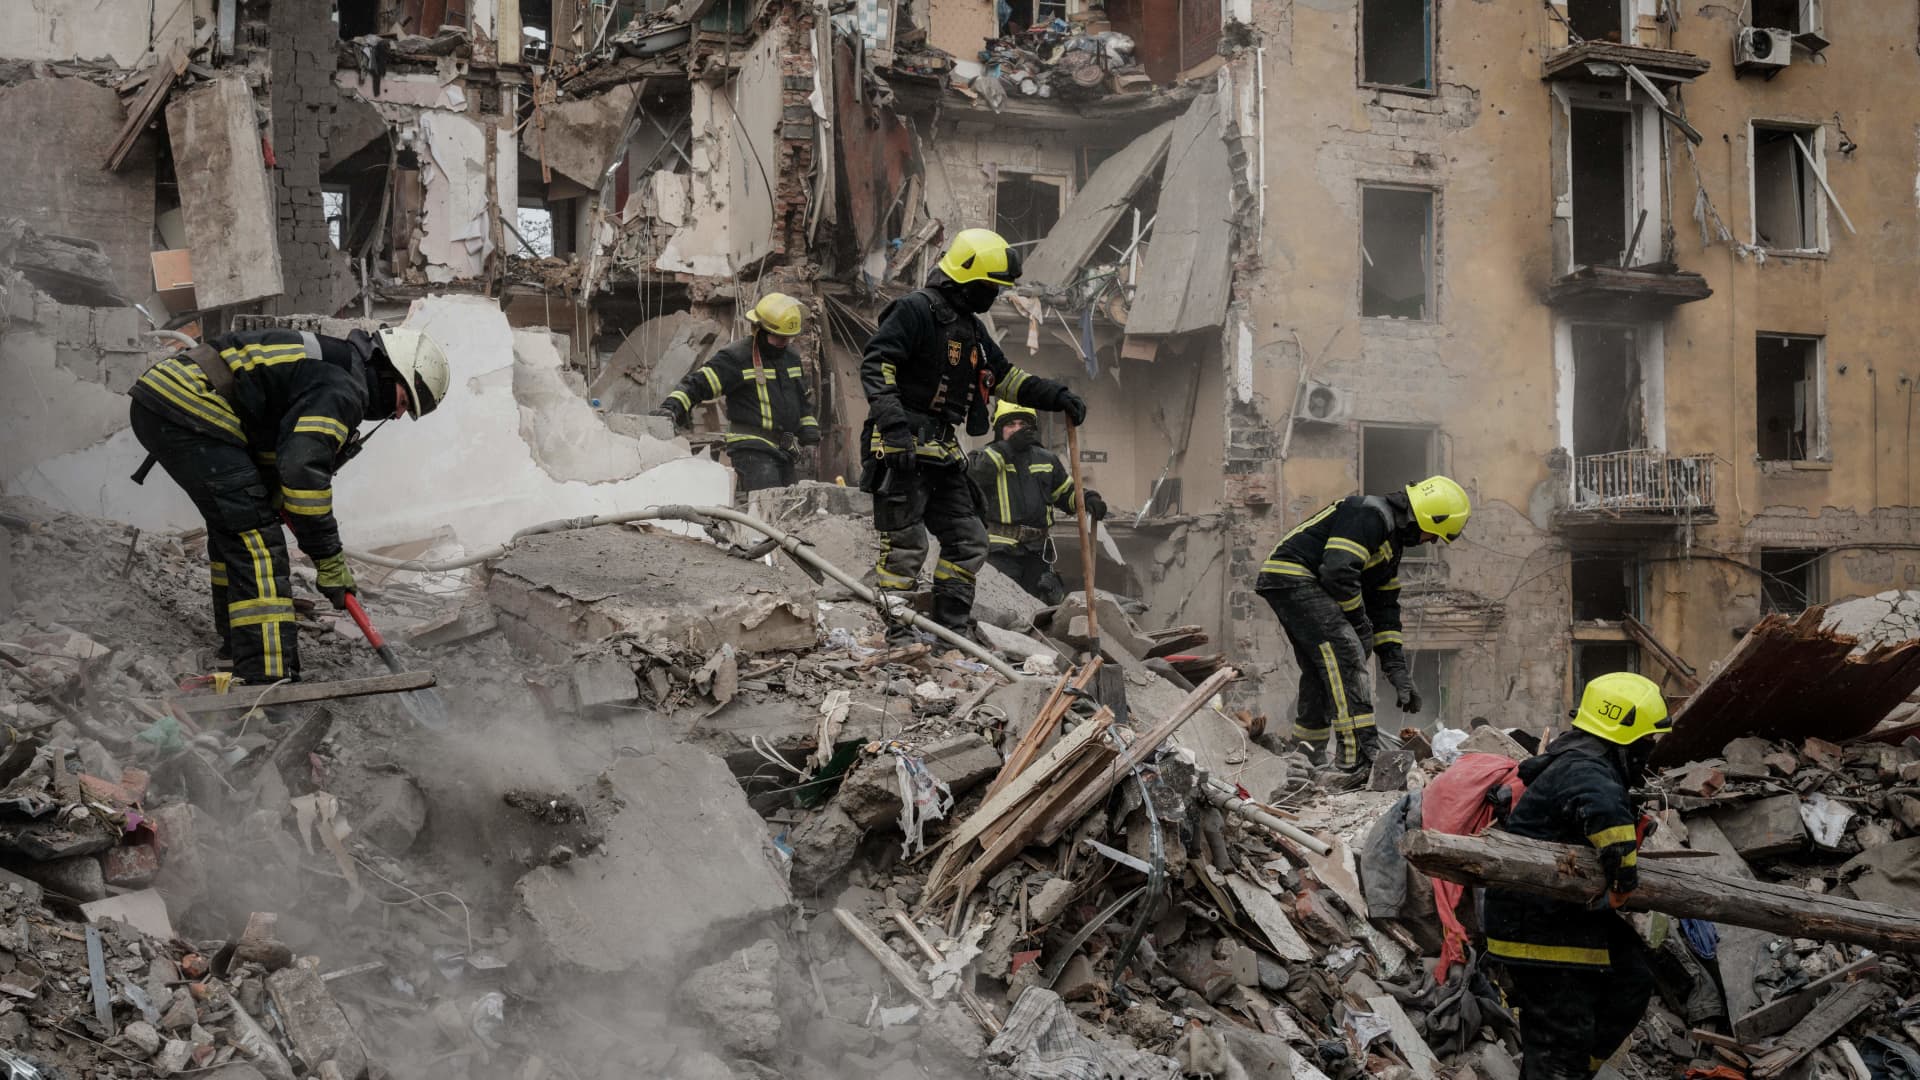 Firefighters work among debris of a building destroyed by a rocket strike in Kramatorsk on Feb. 2, 2023, amid the Russian invasion of Ukraine.